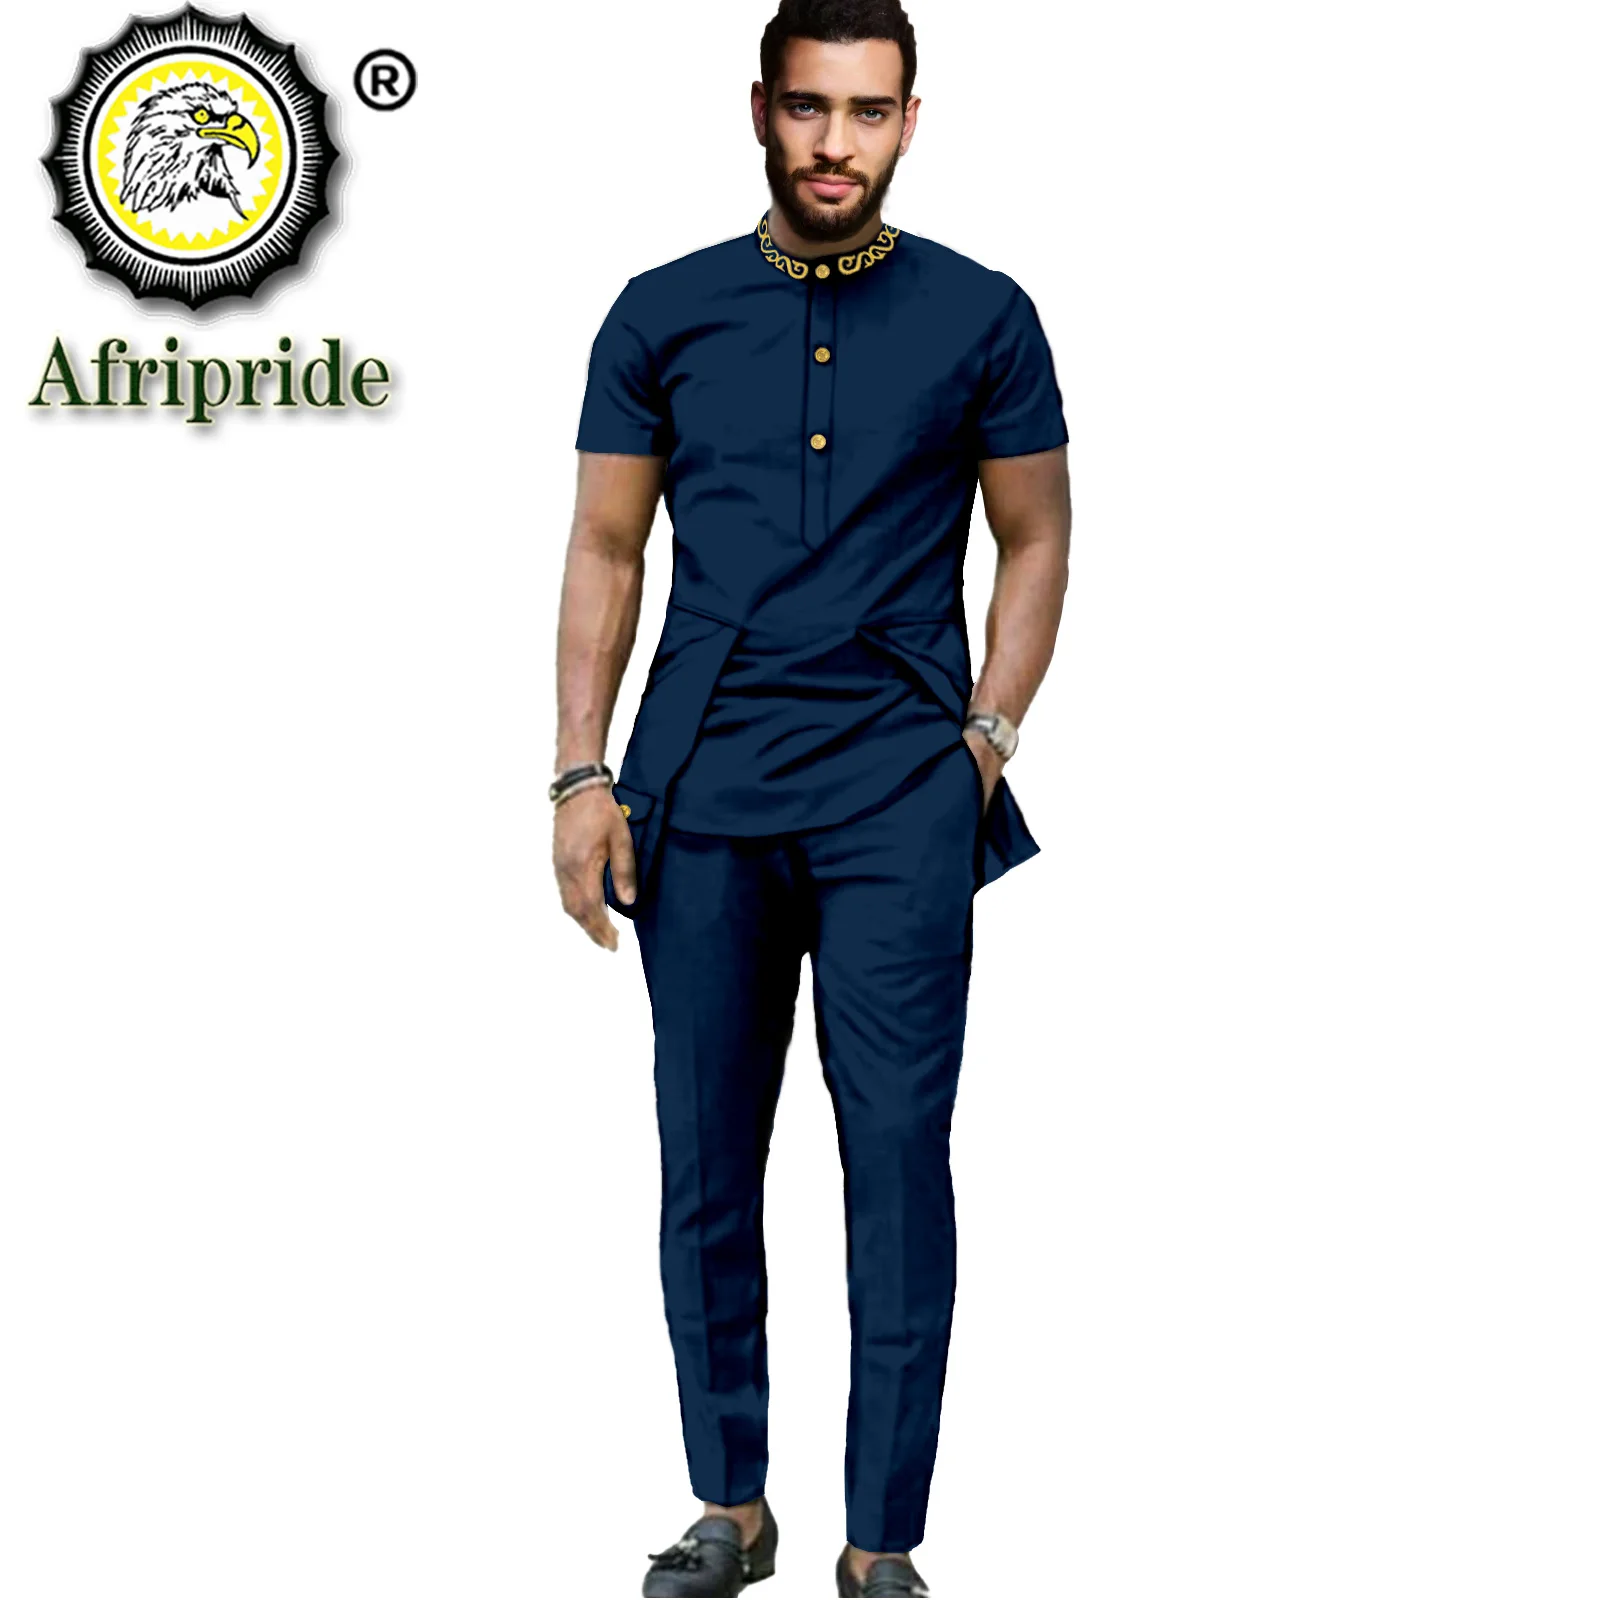 African Clothes for Men Embroidery Short Sleeve Shirt and Pant 2 Piece Set Dashiki Outfit Plus Size Tracksuit Blouse S2116011 african men dashiki clothing short sleeve tops ankara pants set tribal tracksuit blouse shirt attire afripride a1916070